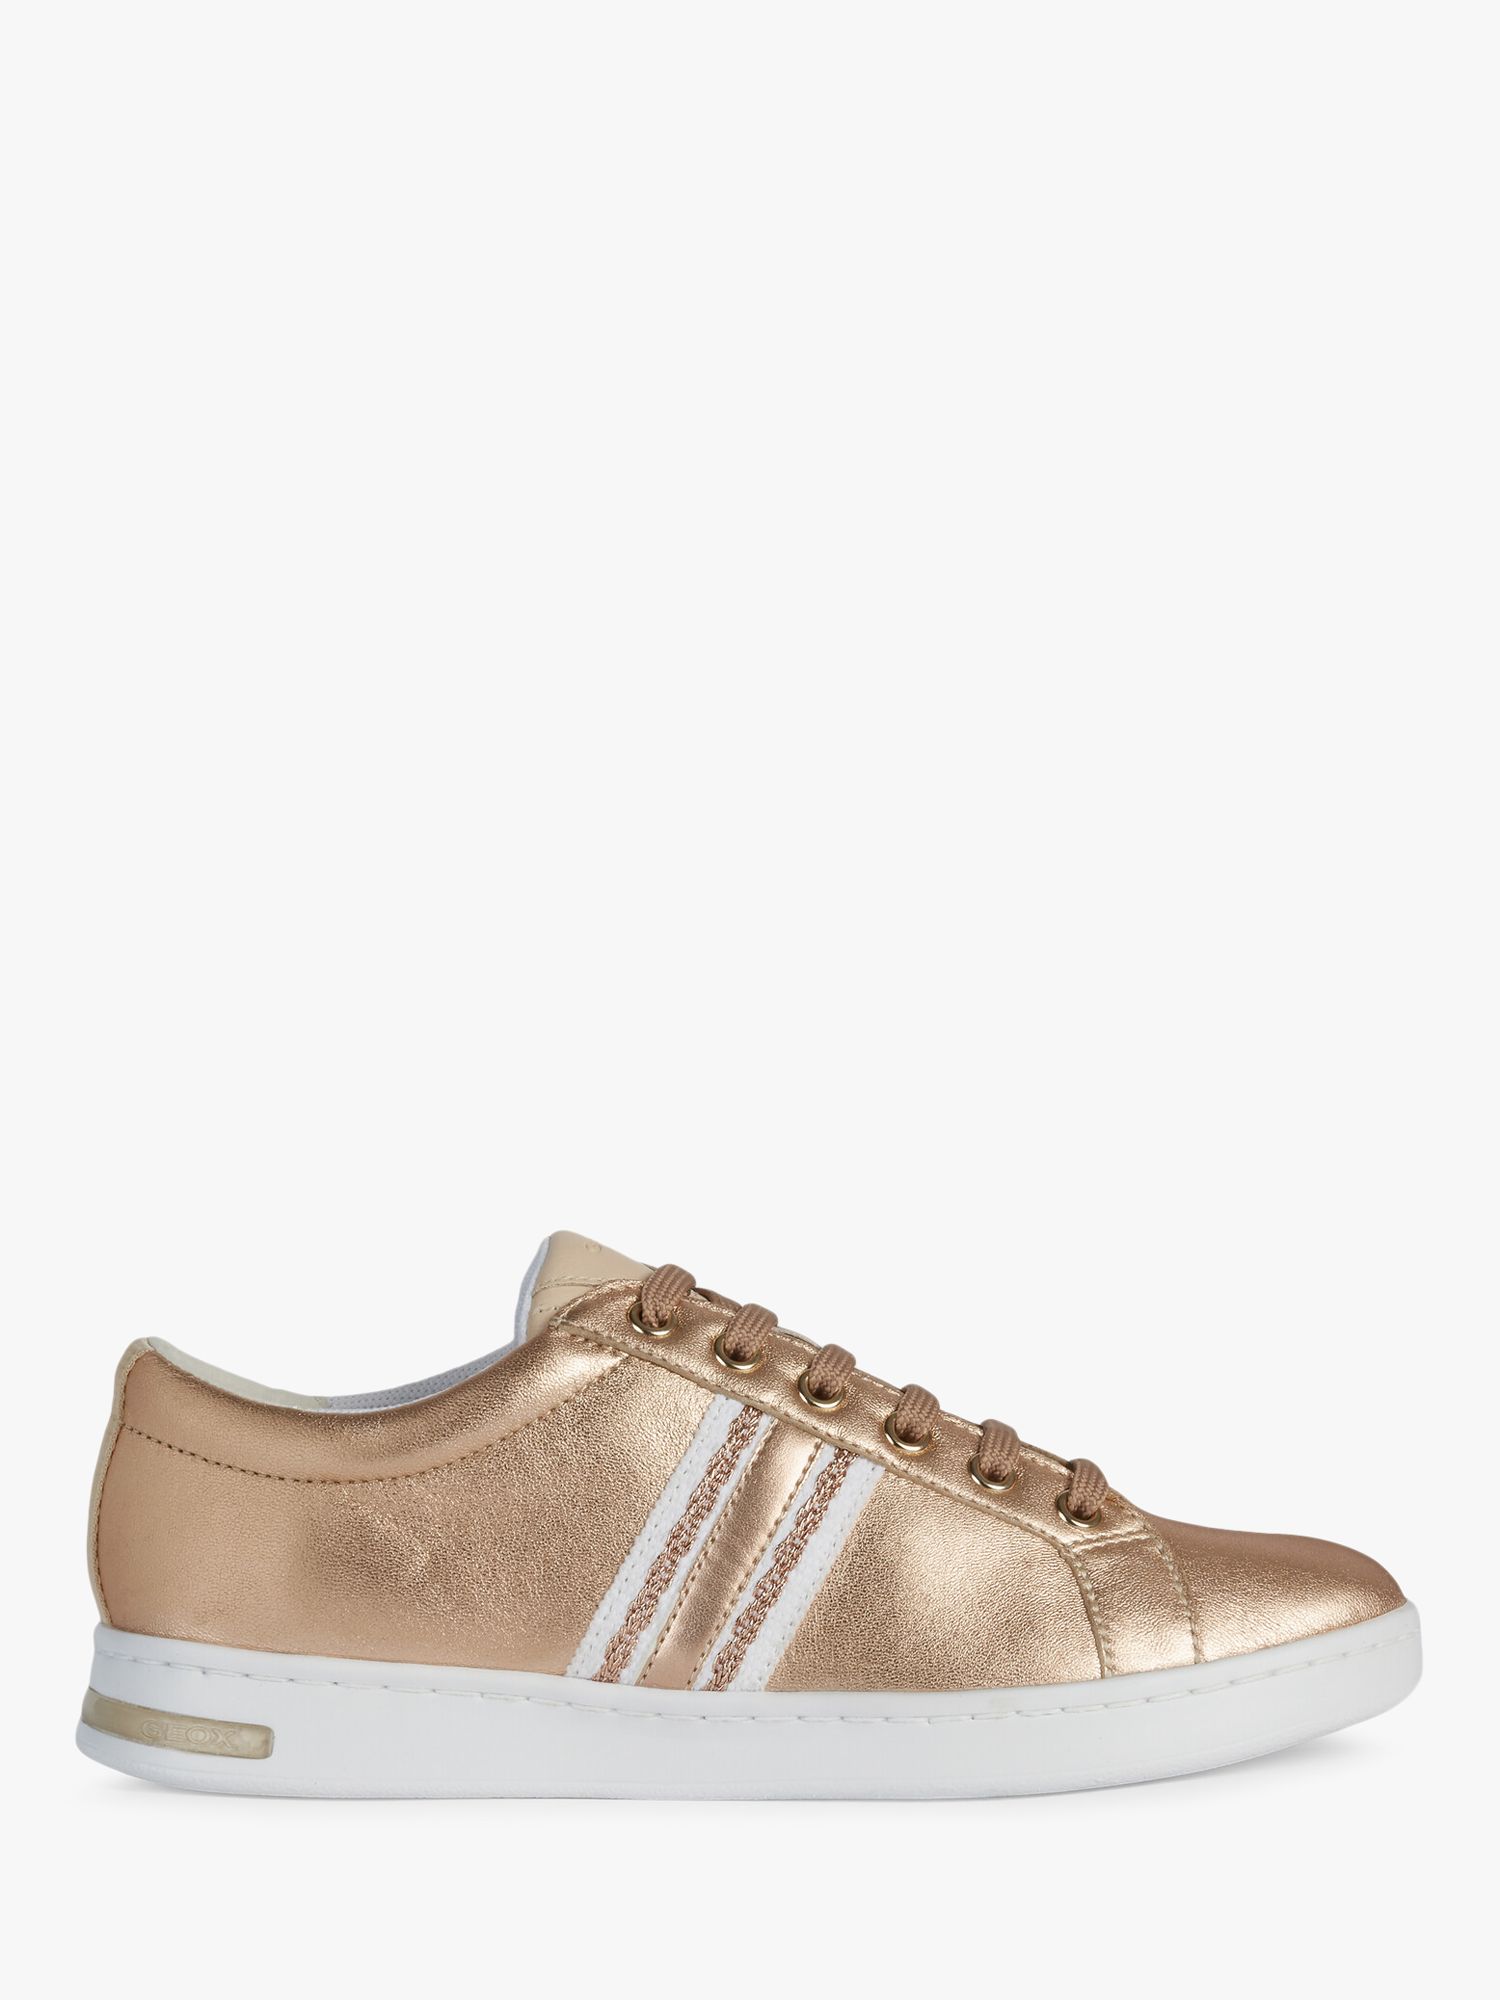 Geox Women's Jaysen Lace Up Trainers, Rose Gold/Skin